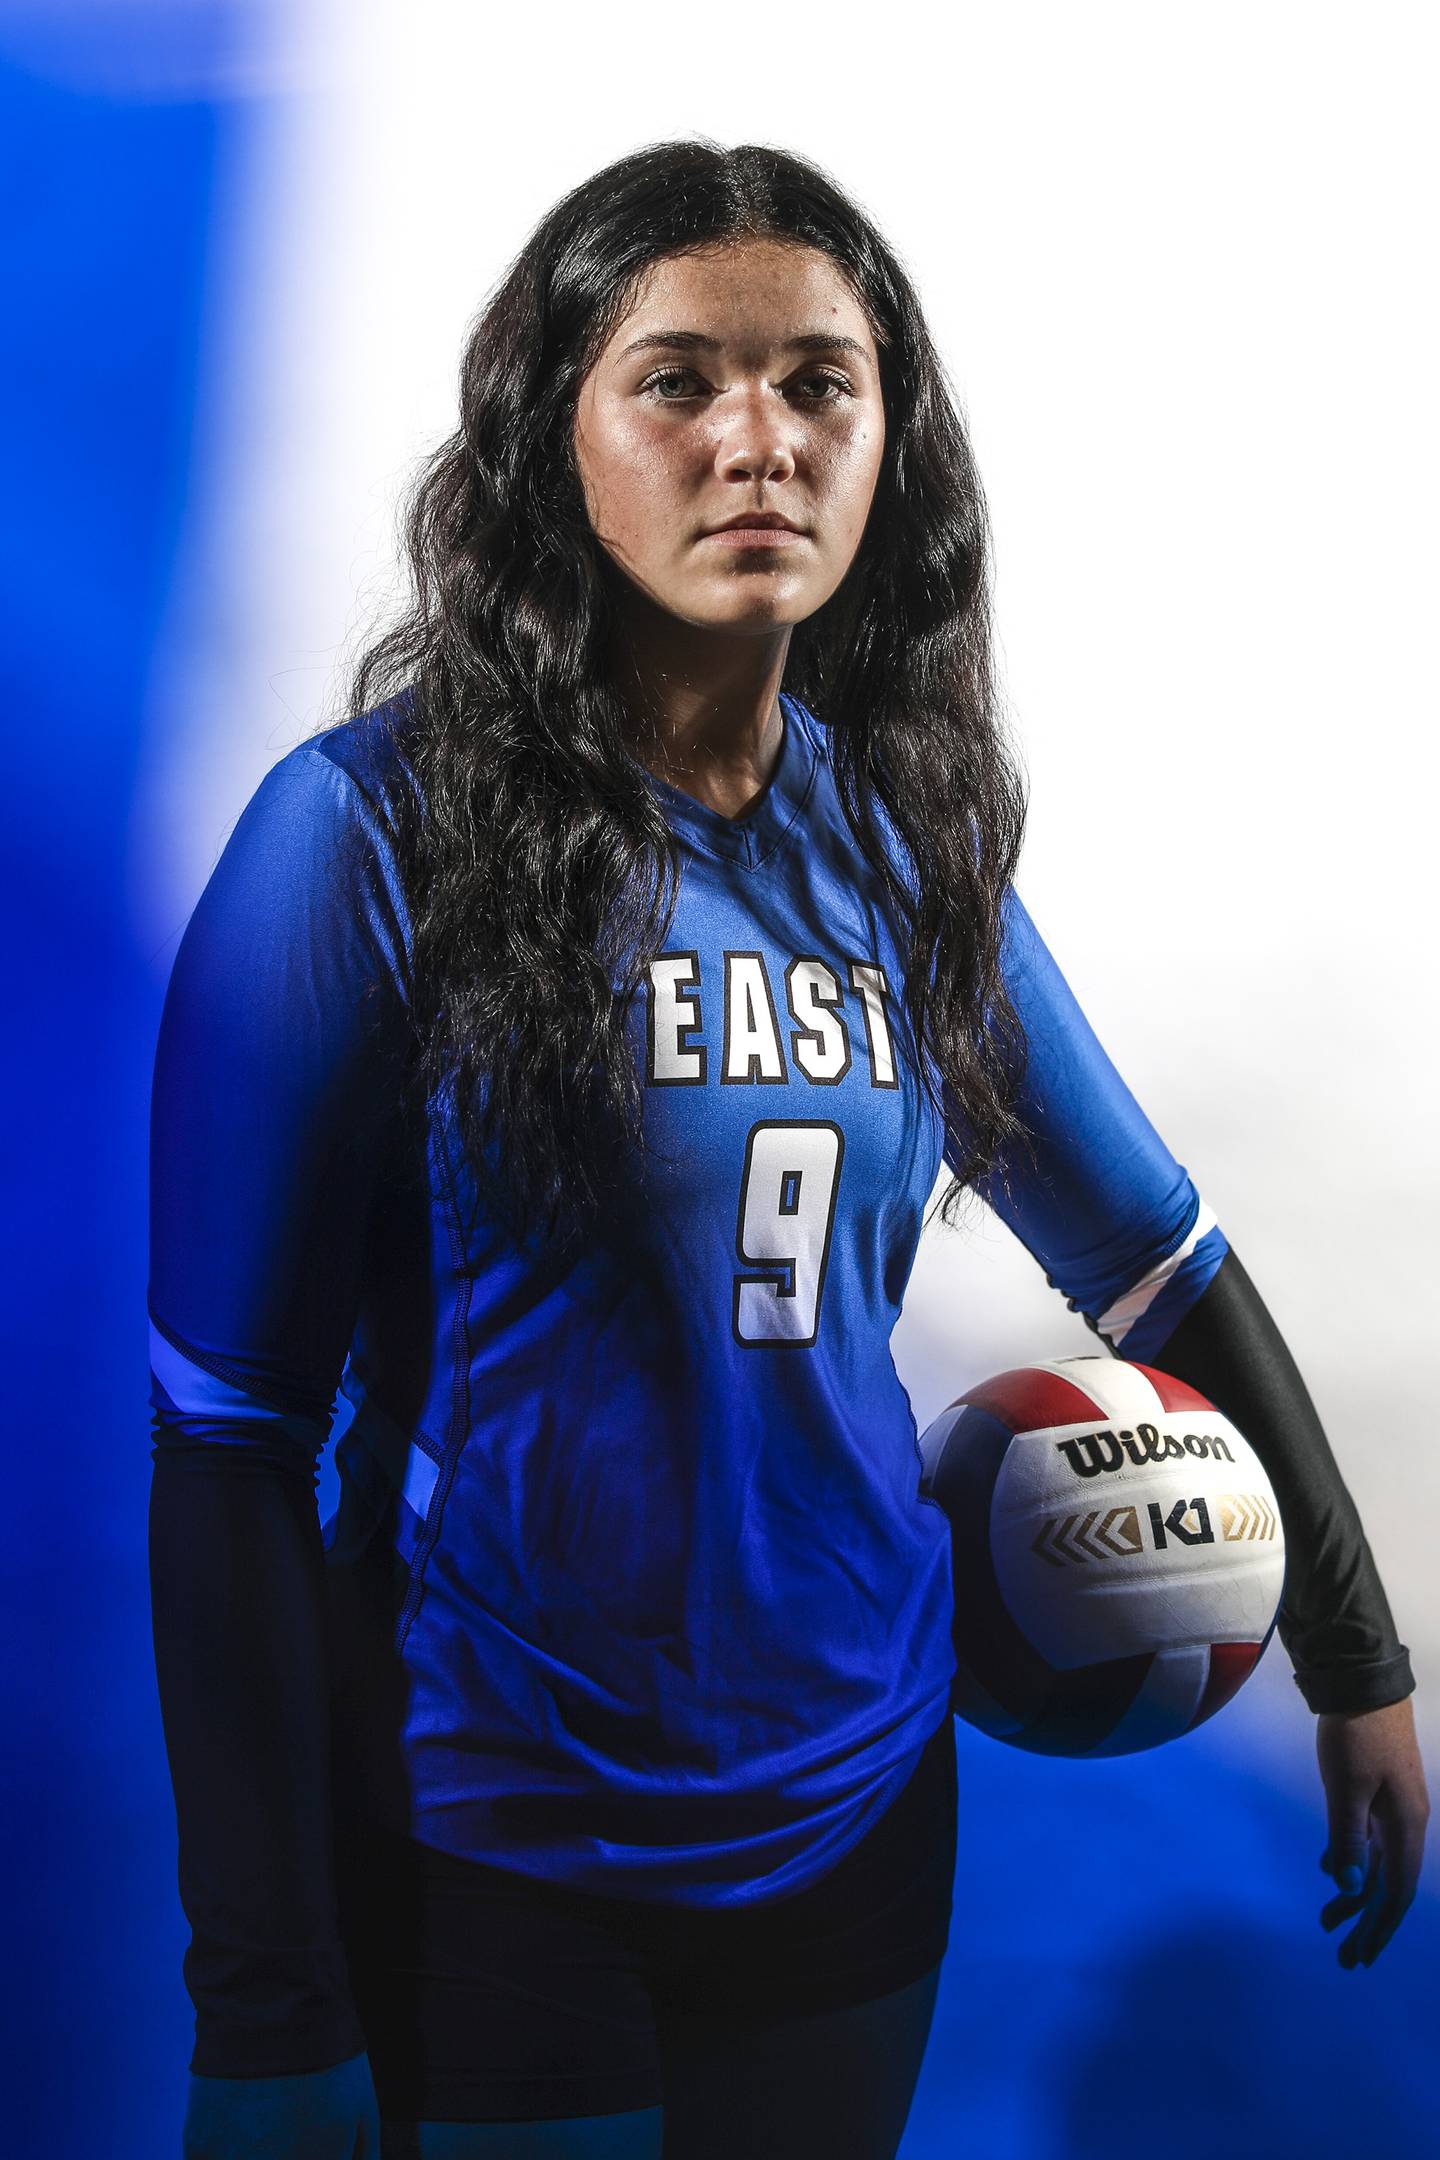 Lincoln-Way East's Kayleigh Ritter is the Herald-News volleyball player of the year, on Monday, May 24, 2021, at Lincoln-Way East High School in Frankfort, Ill.